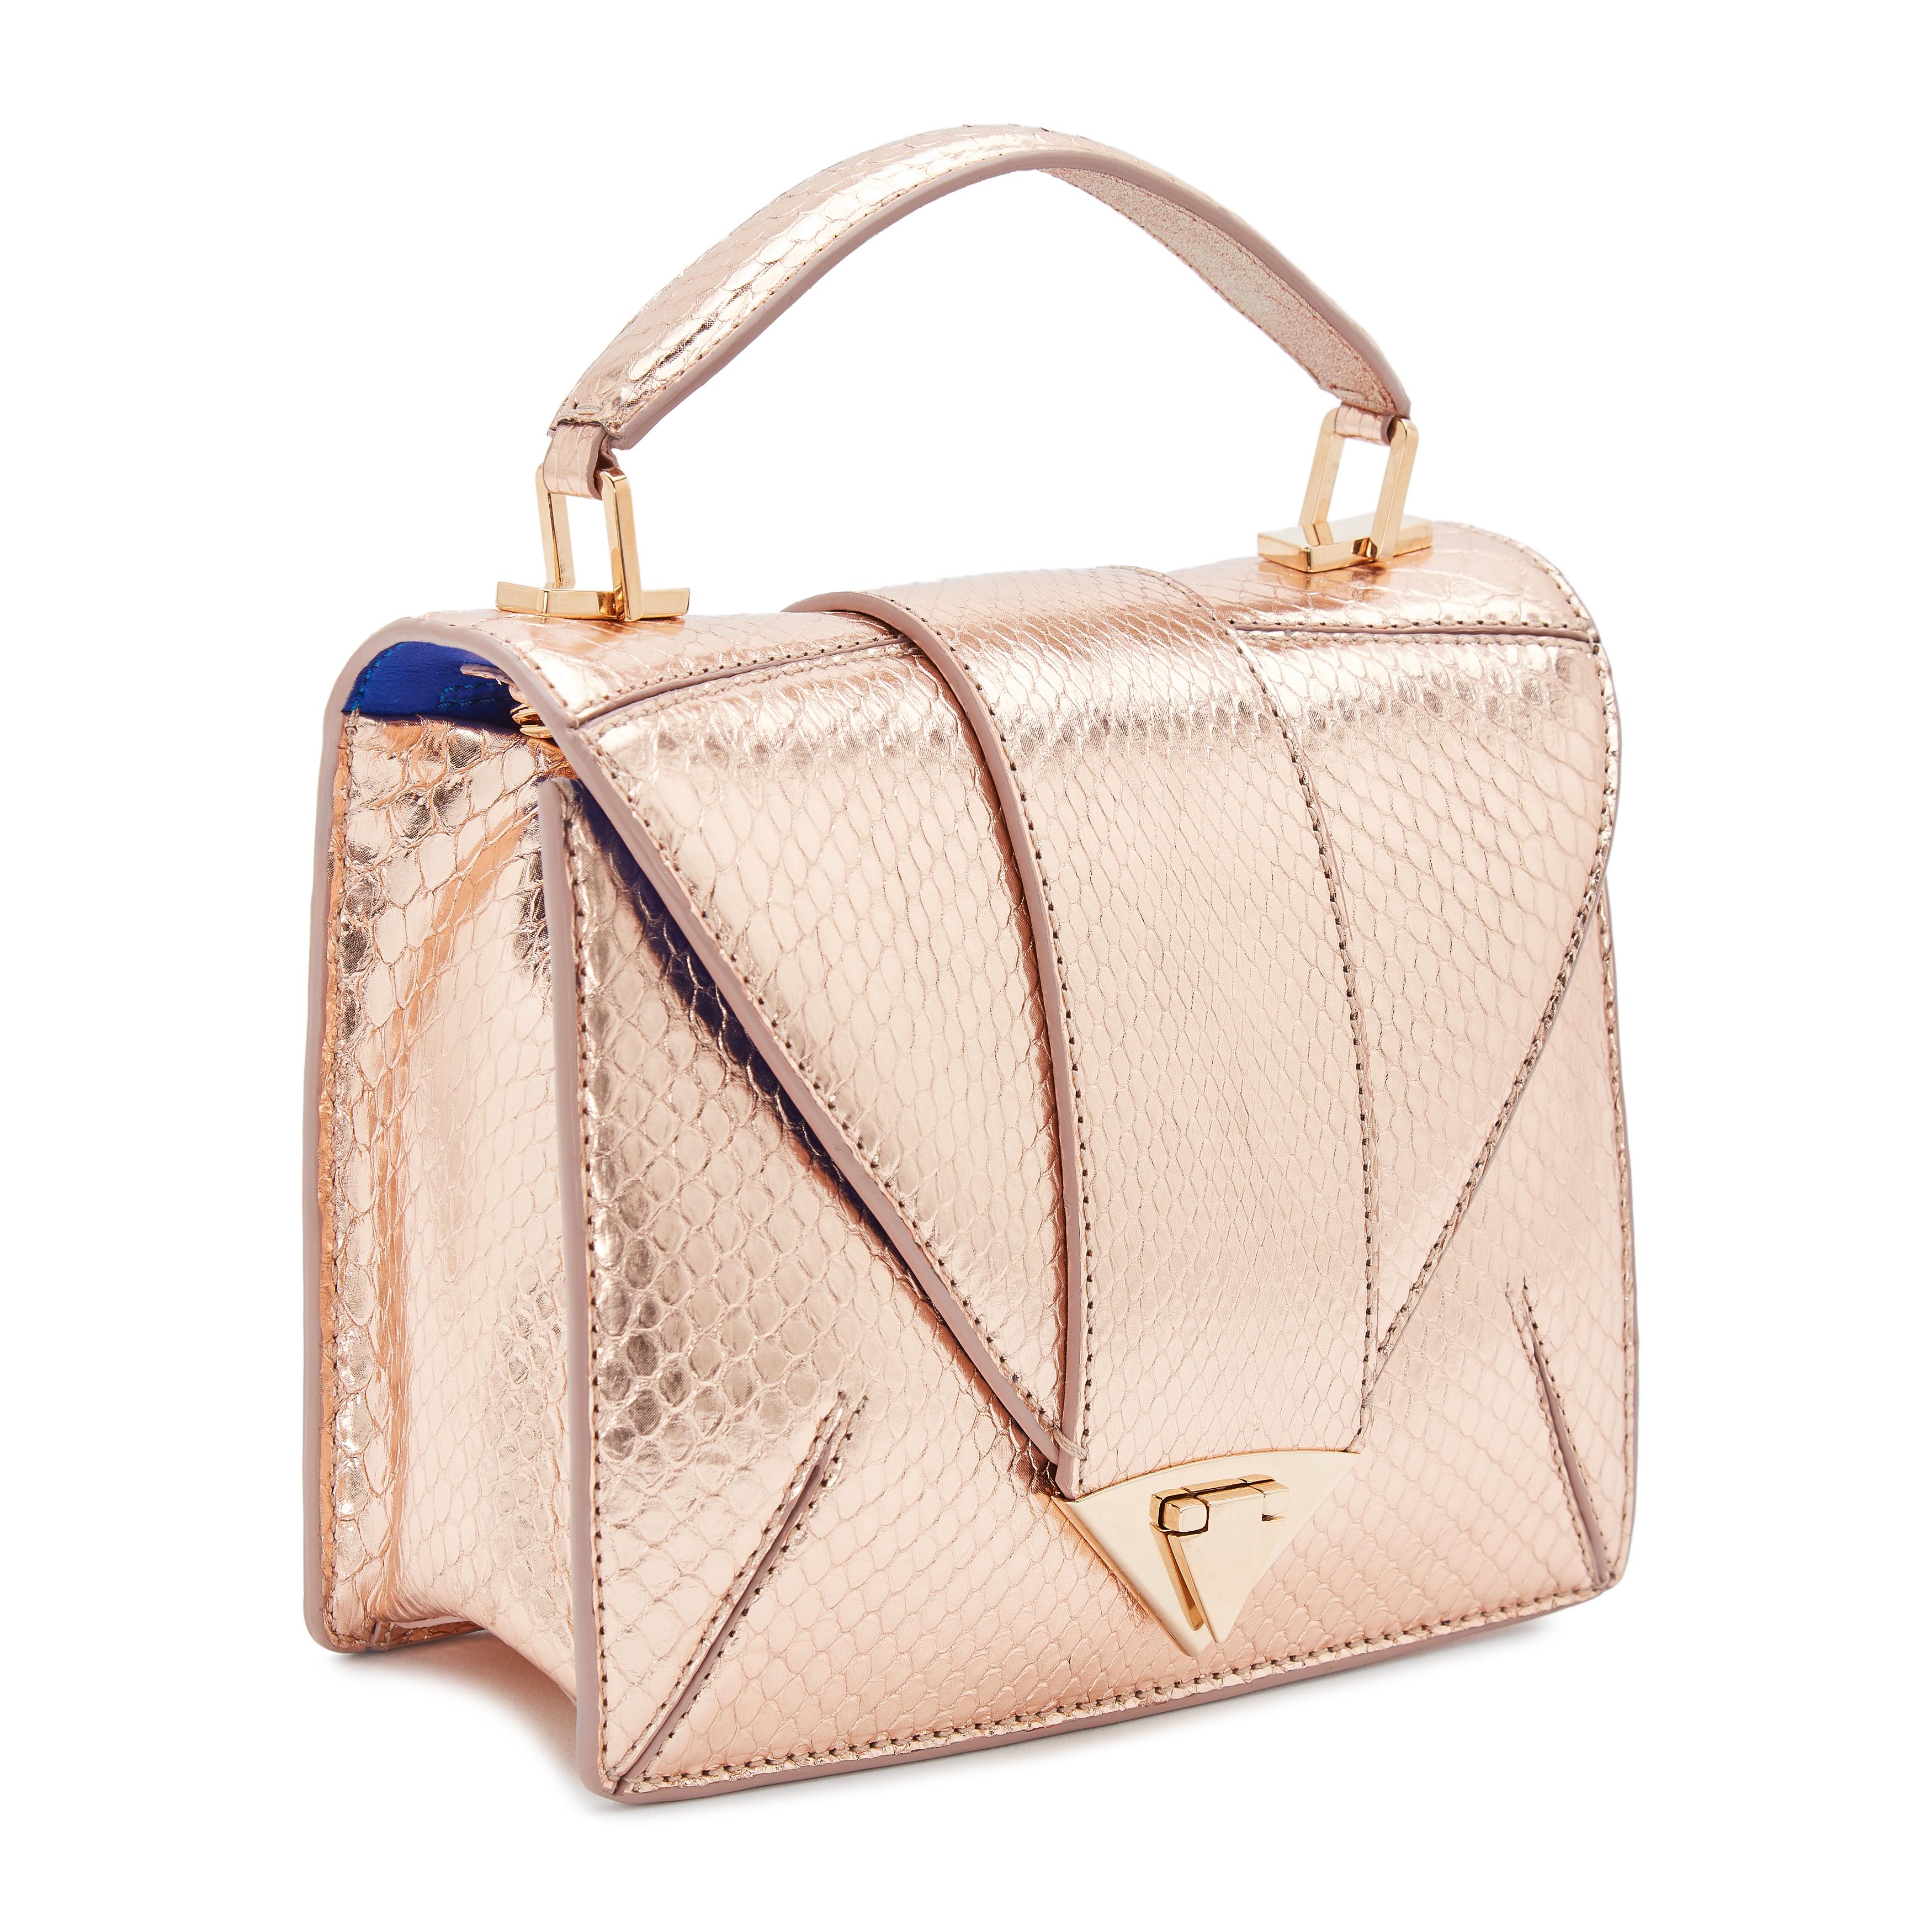 The Rita Small Rose Gold Python Rose Gold Hardware is a semi-structured handbag with a triangular front-flap and our custom spear-lock closure. It is designed with a flexible top handle and an optional chain with Rose Gold Python accent.  It has a